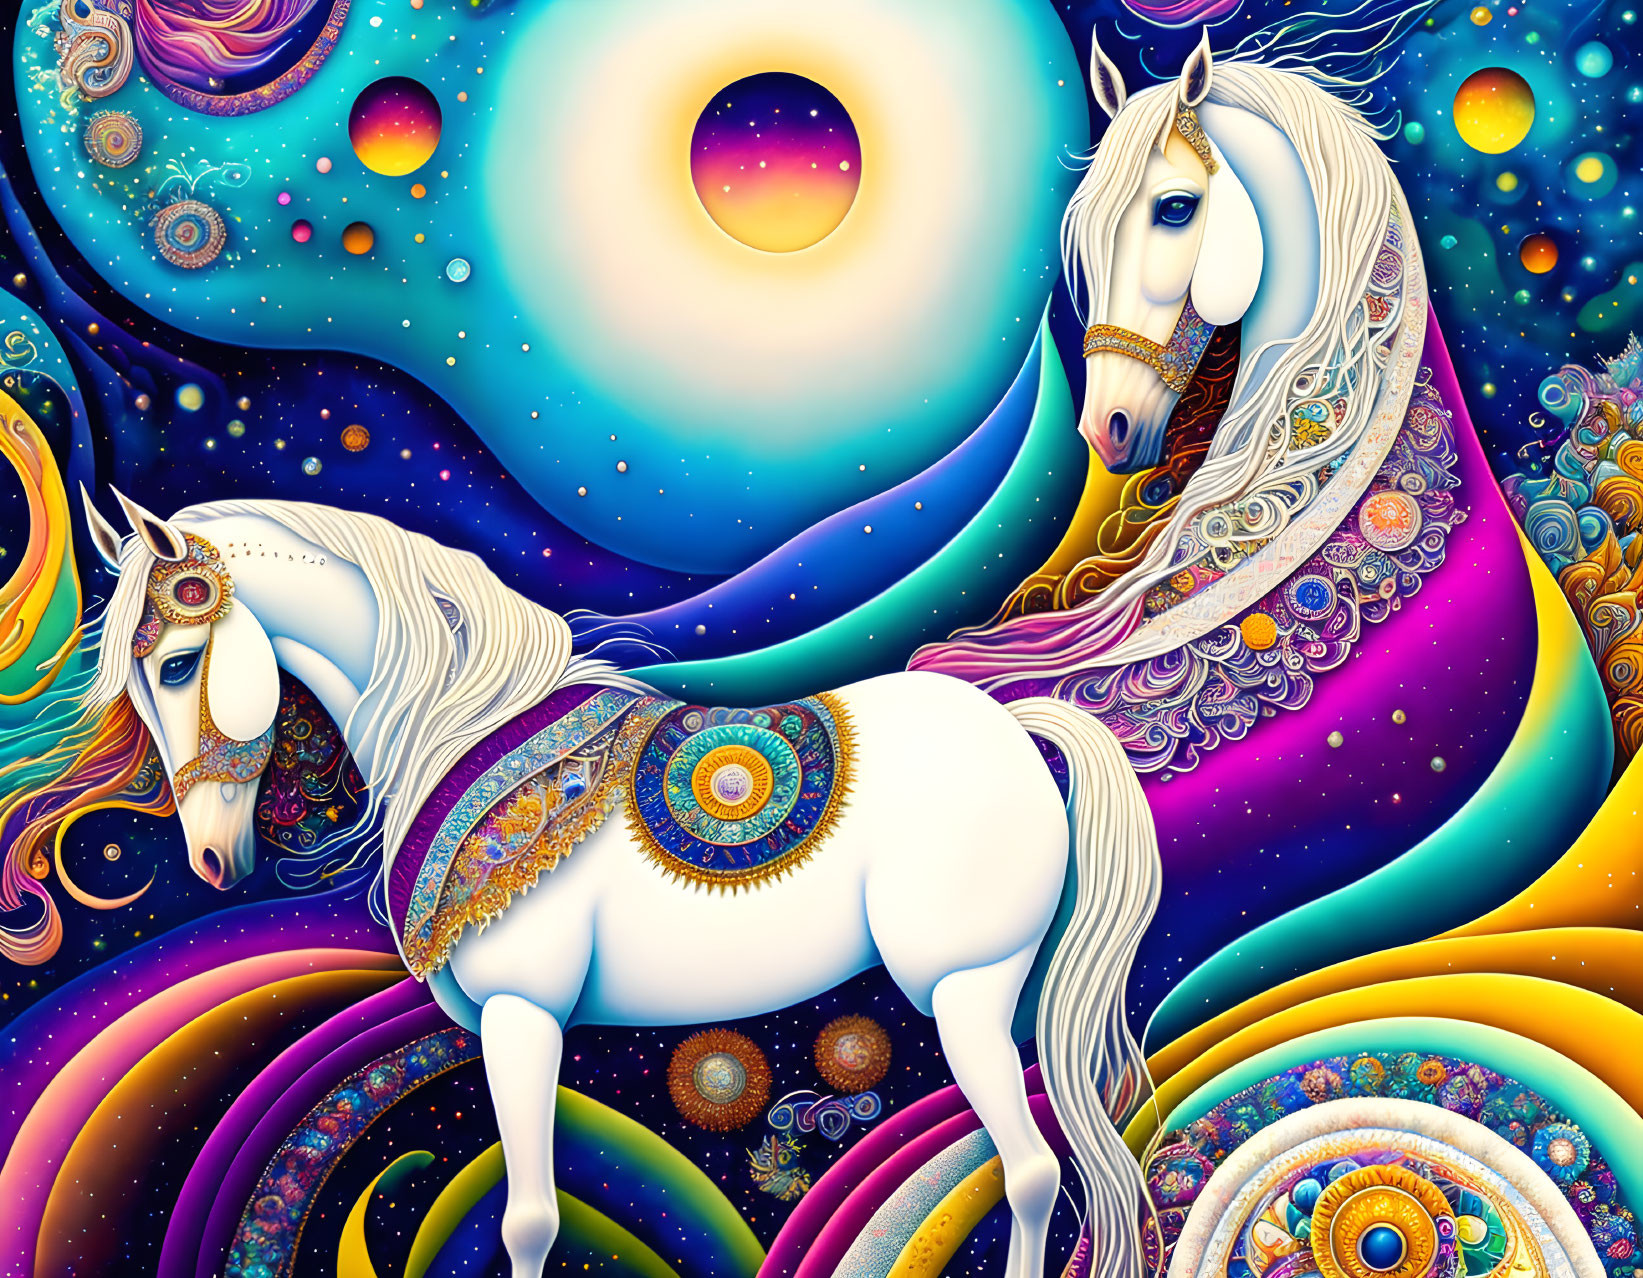 Colorful Psychedelic Artwork: White Horses with Cosmic Patterns